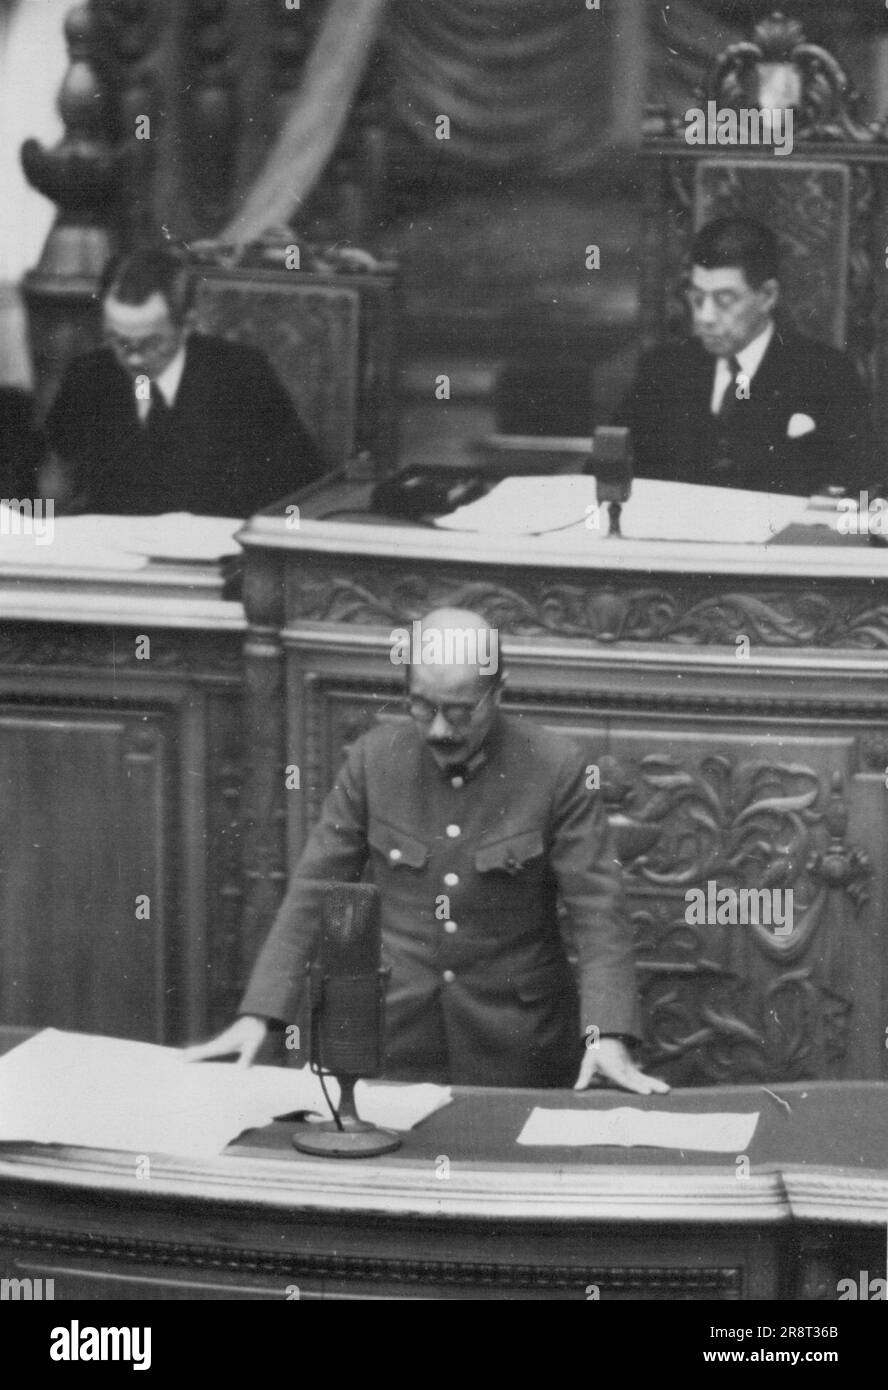 War Minister Tojo ... War Minister Hideki Tojo, was taken this morning at the House of Peers when the 76th session of the Imperial Diet, as the situation in Far East, in which he stated 'The Chungking regime has been weakened tremendously in both fighting power and financial strength dut to consecutive campaigns staged by the Japanese fighting forces'. January 21, 1941. (Photo by The Domei News Photos Service). Stock Photo